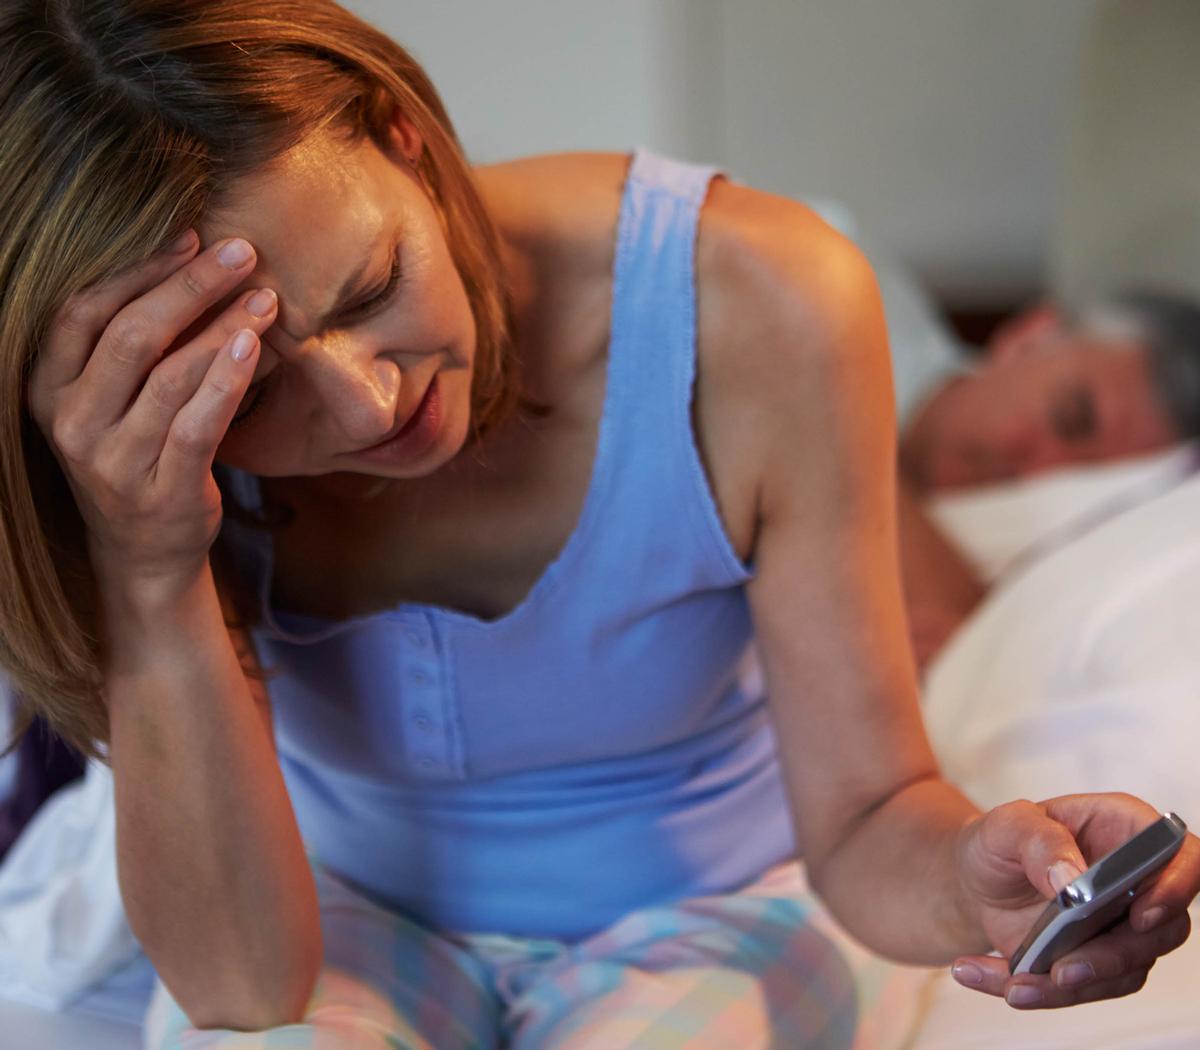 The study suggests that sleep pattern disruption is a cause of breast cancer development, weight gain and other metabolic problems / Shutterstock / Monkey Business Images